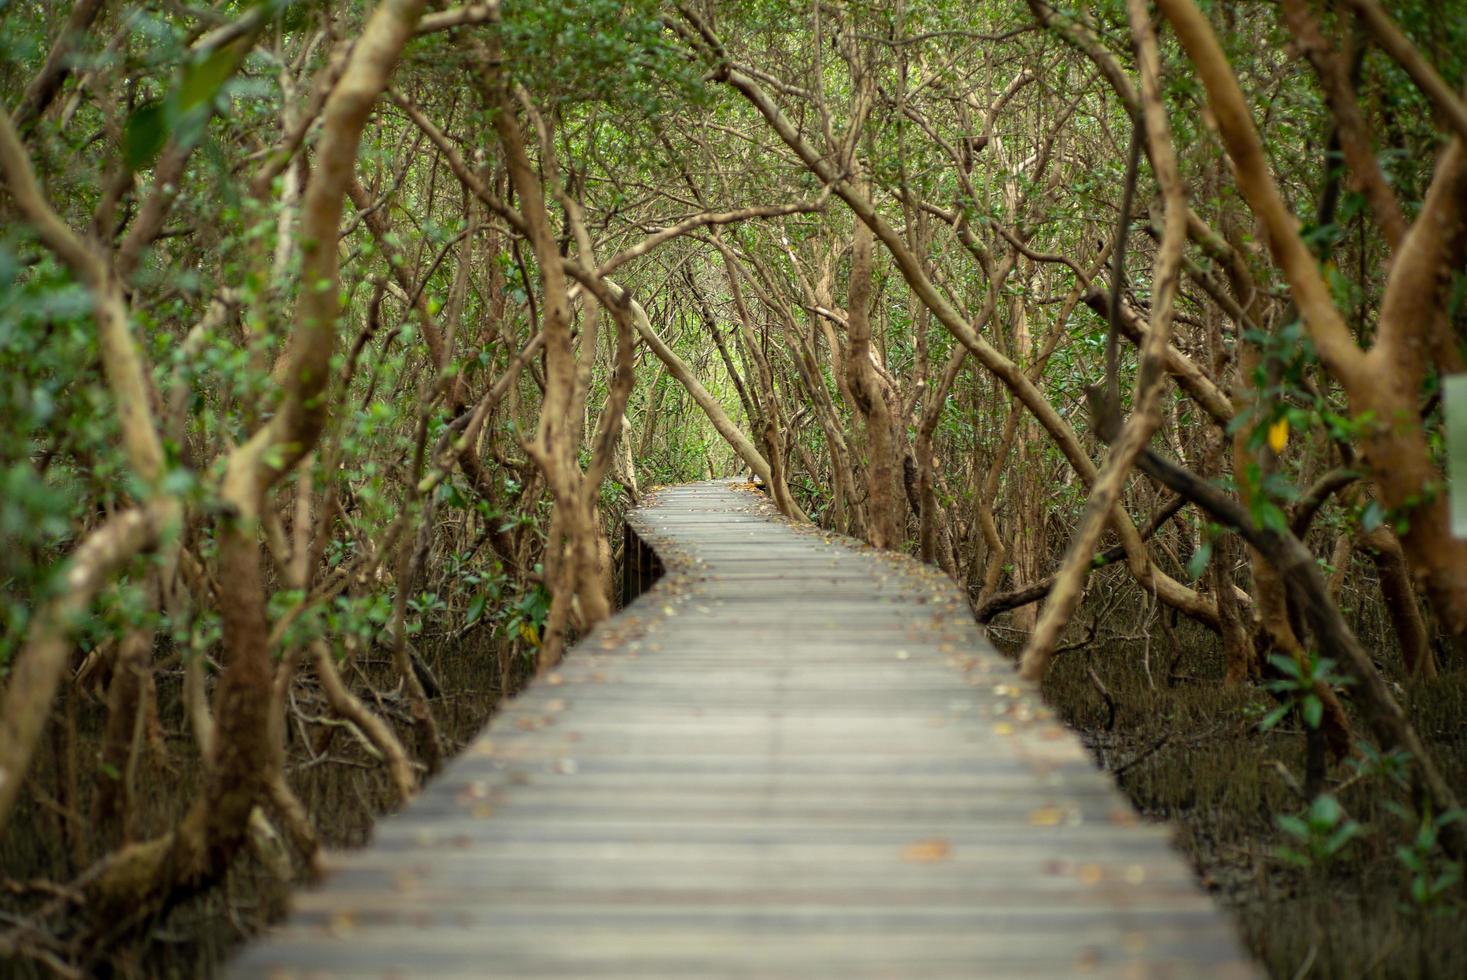 Landscape of mangroves forest with wooden walkway for surveying the ecology photo